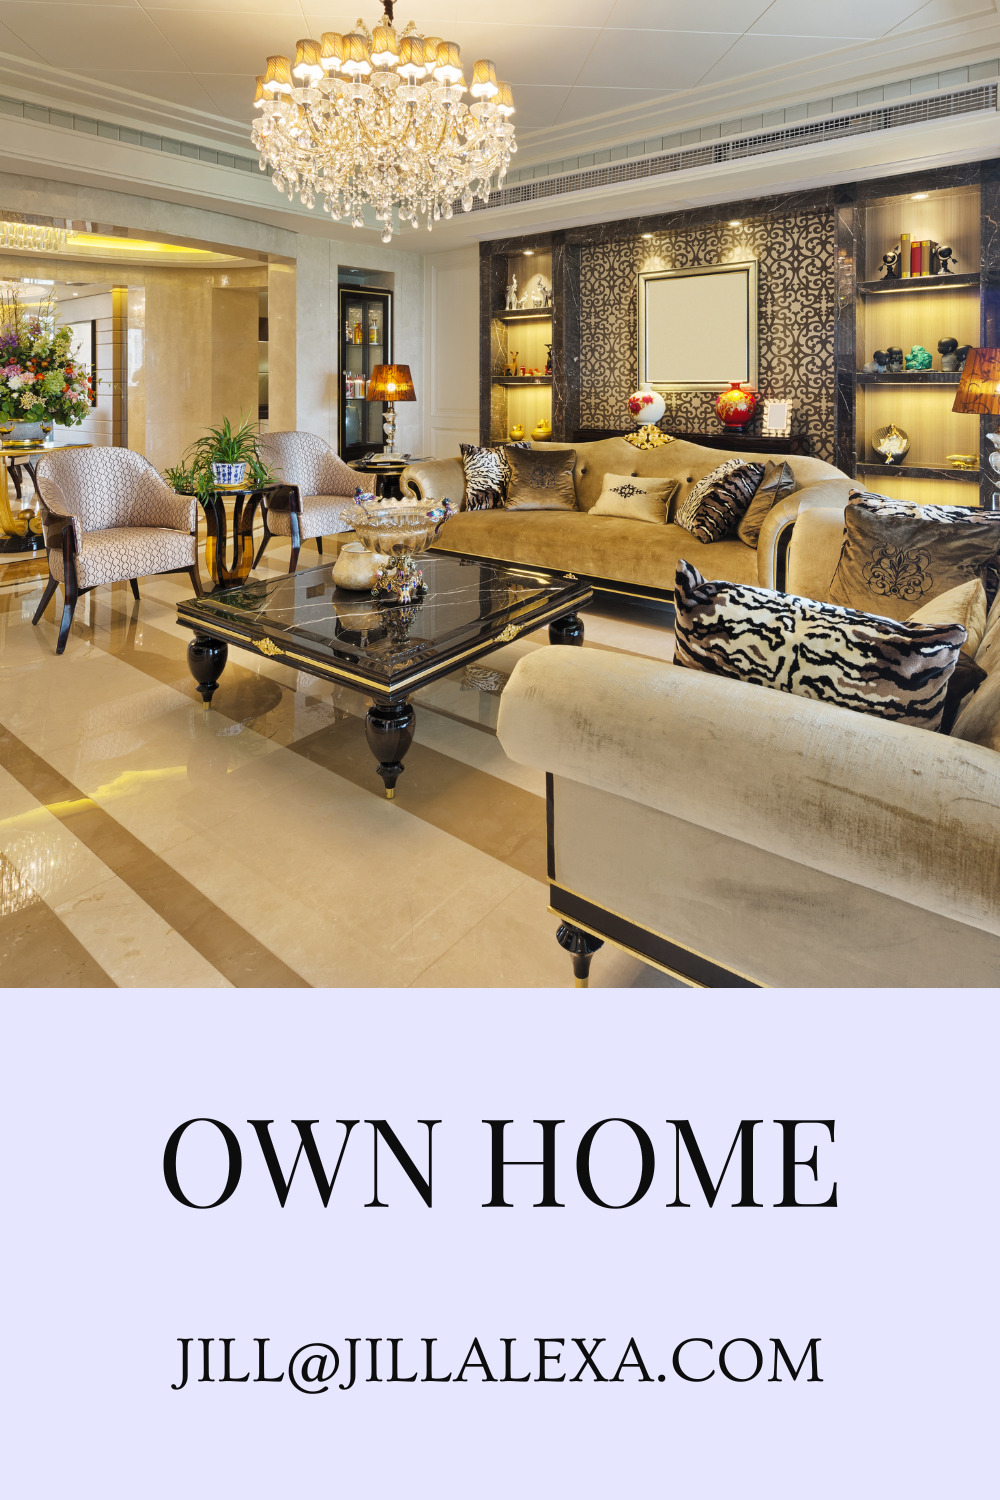 WHAT MAKES OWNING YOUR OWN HOME SPECIAL | OWN HOME